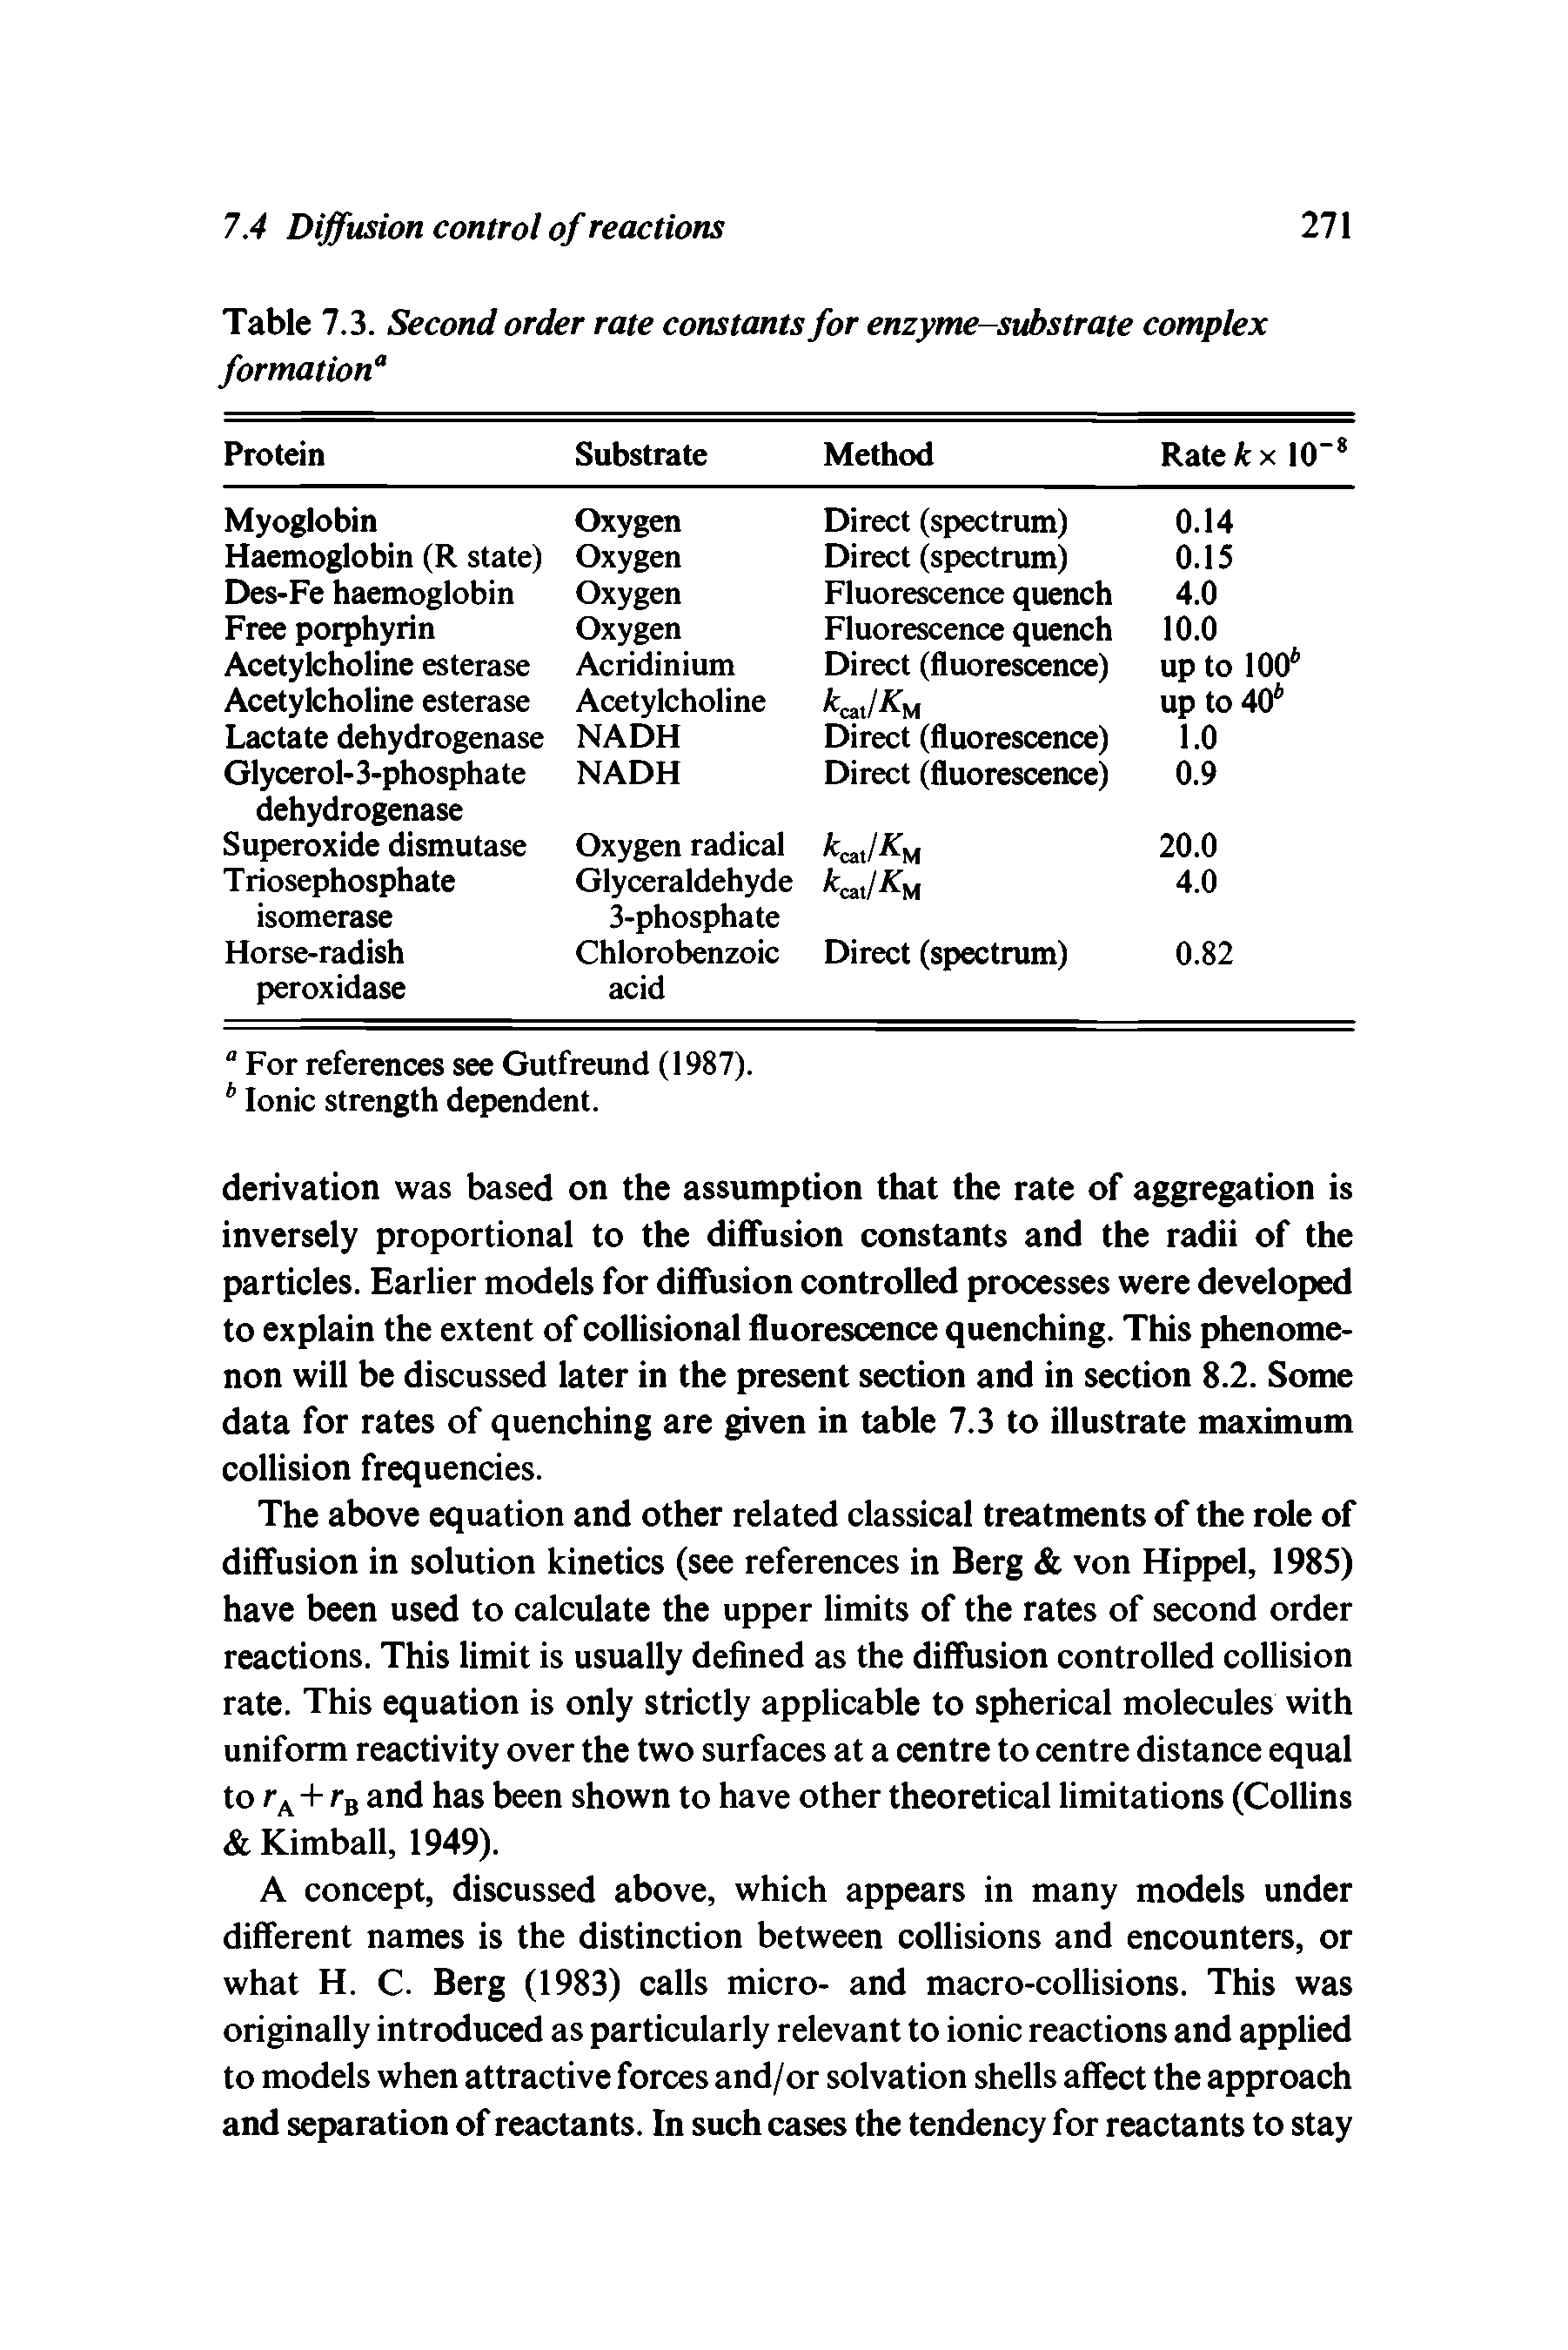 Table 7.3. Second order rate constants for enzyme-substrate complex formation"...